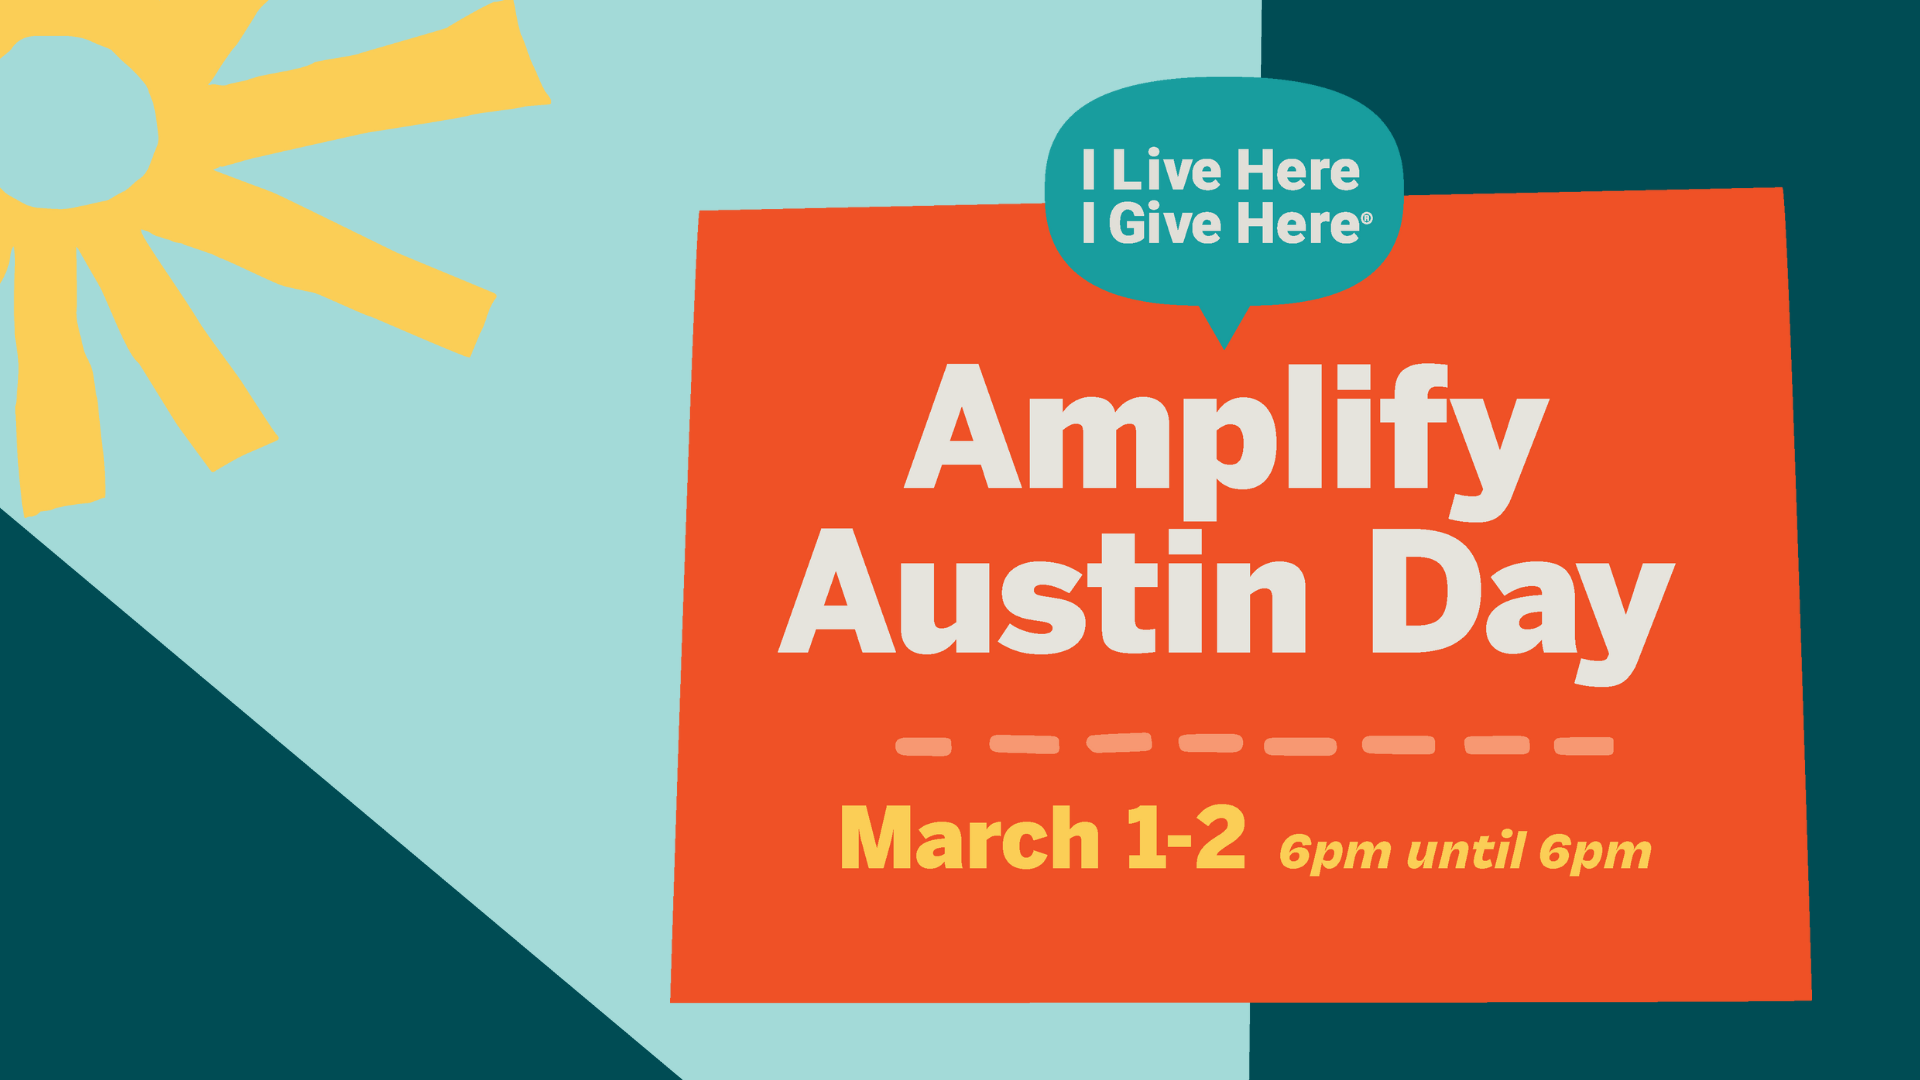 Amplify Austin Day 2023 March 1 through 2 from 6pm to 6pm